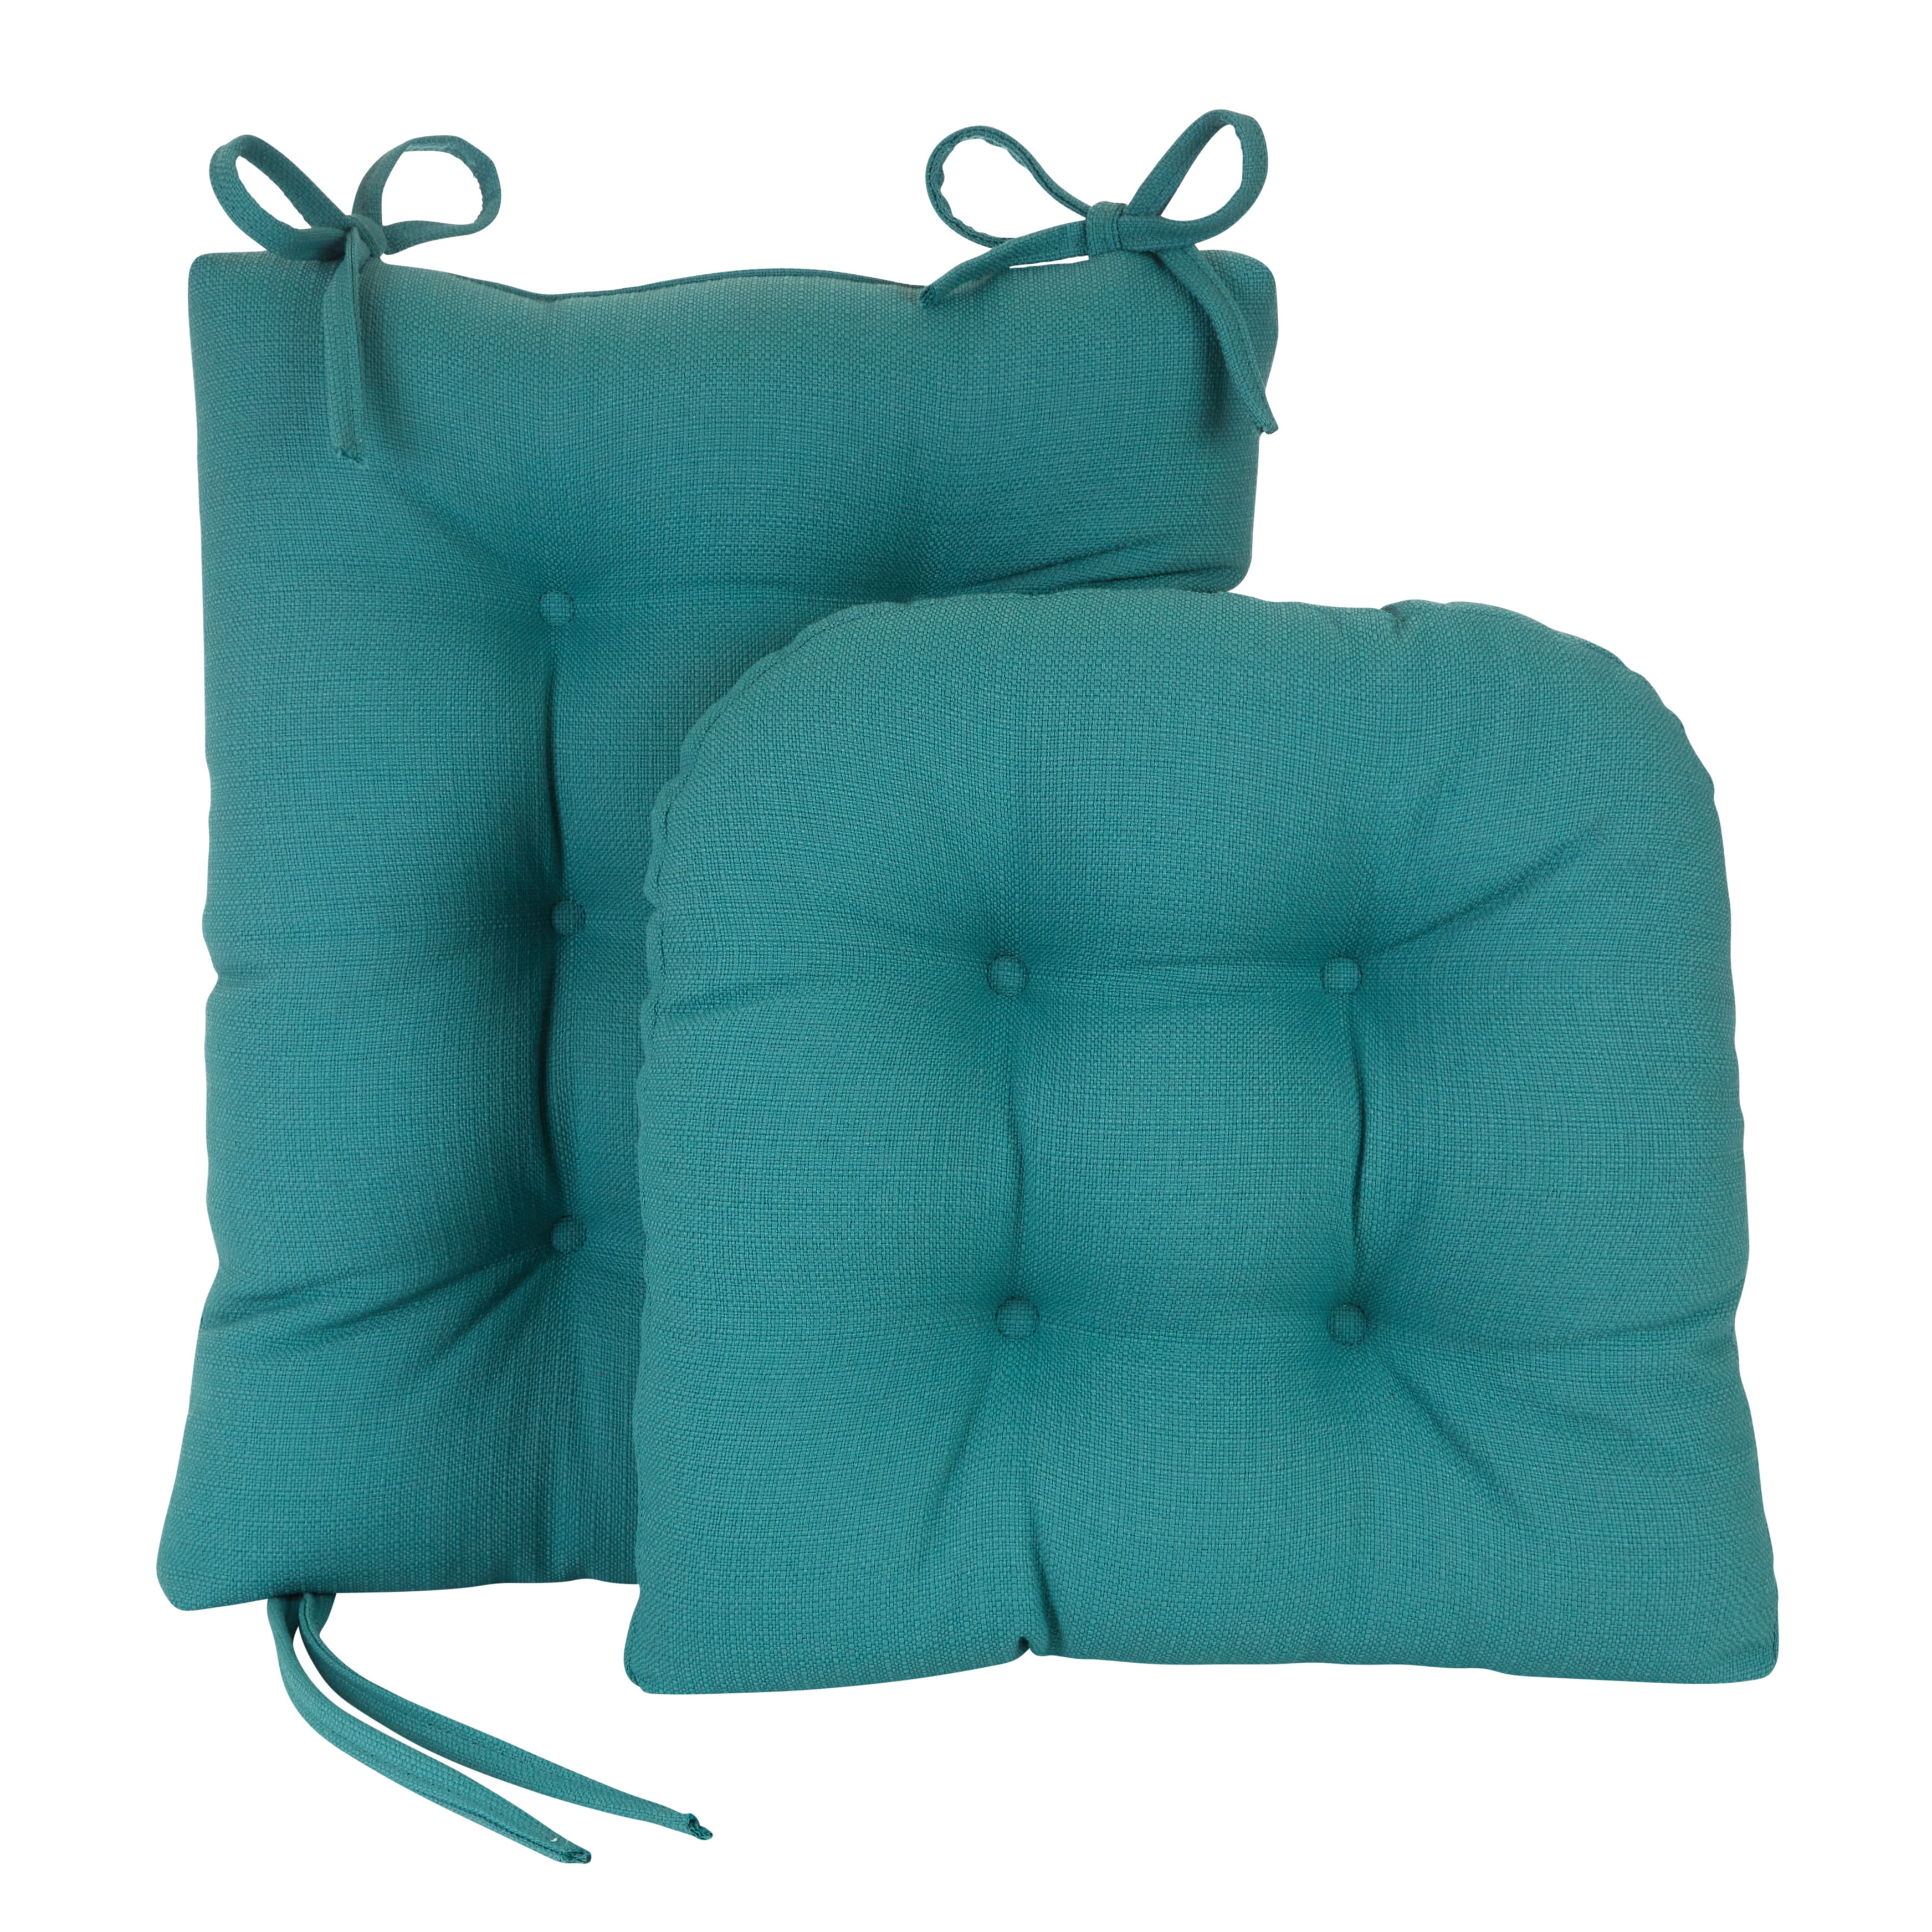 Gripper 14.5 x 14 Tonic Delightfill Bistro Chair Cushion Set of 2 - Blue